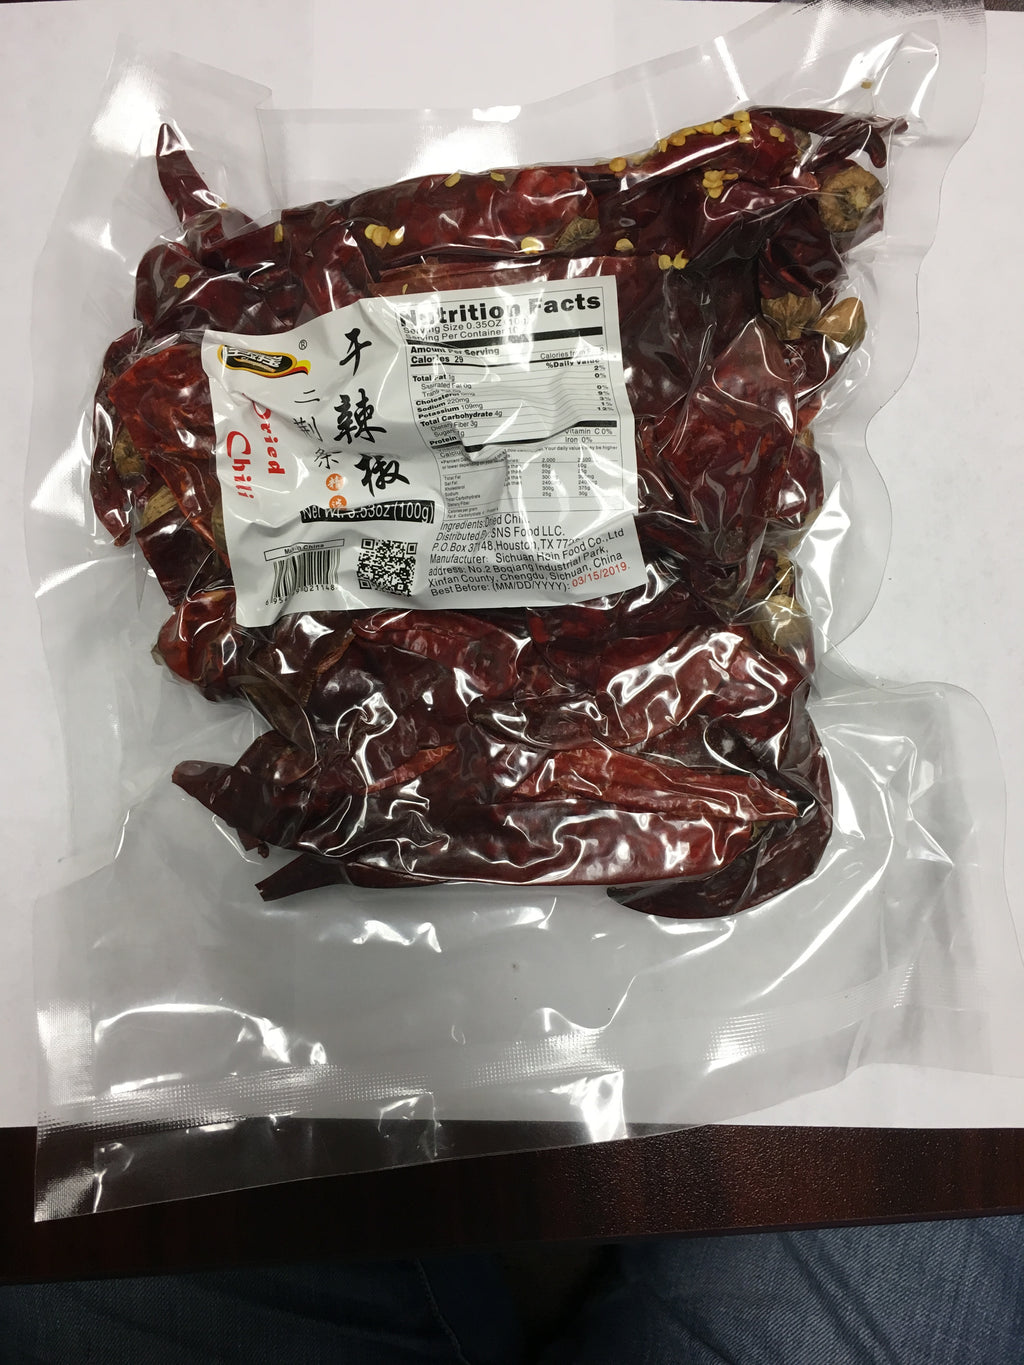 Spicy Element Sichuan Dried Red Chili Pepper - Er Jing Tiao 3.53 oz for Sichuan Cuisine and Hot Pot(100g)